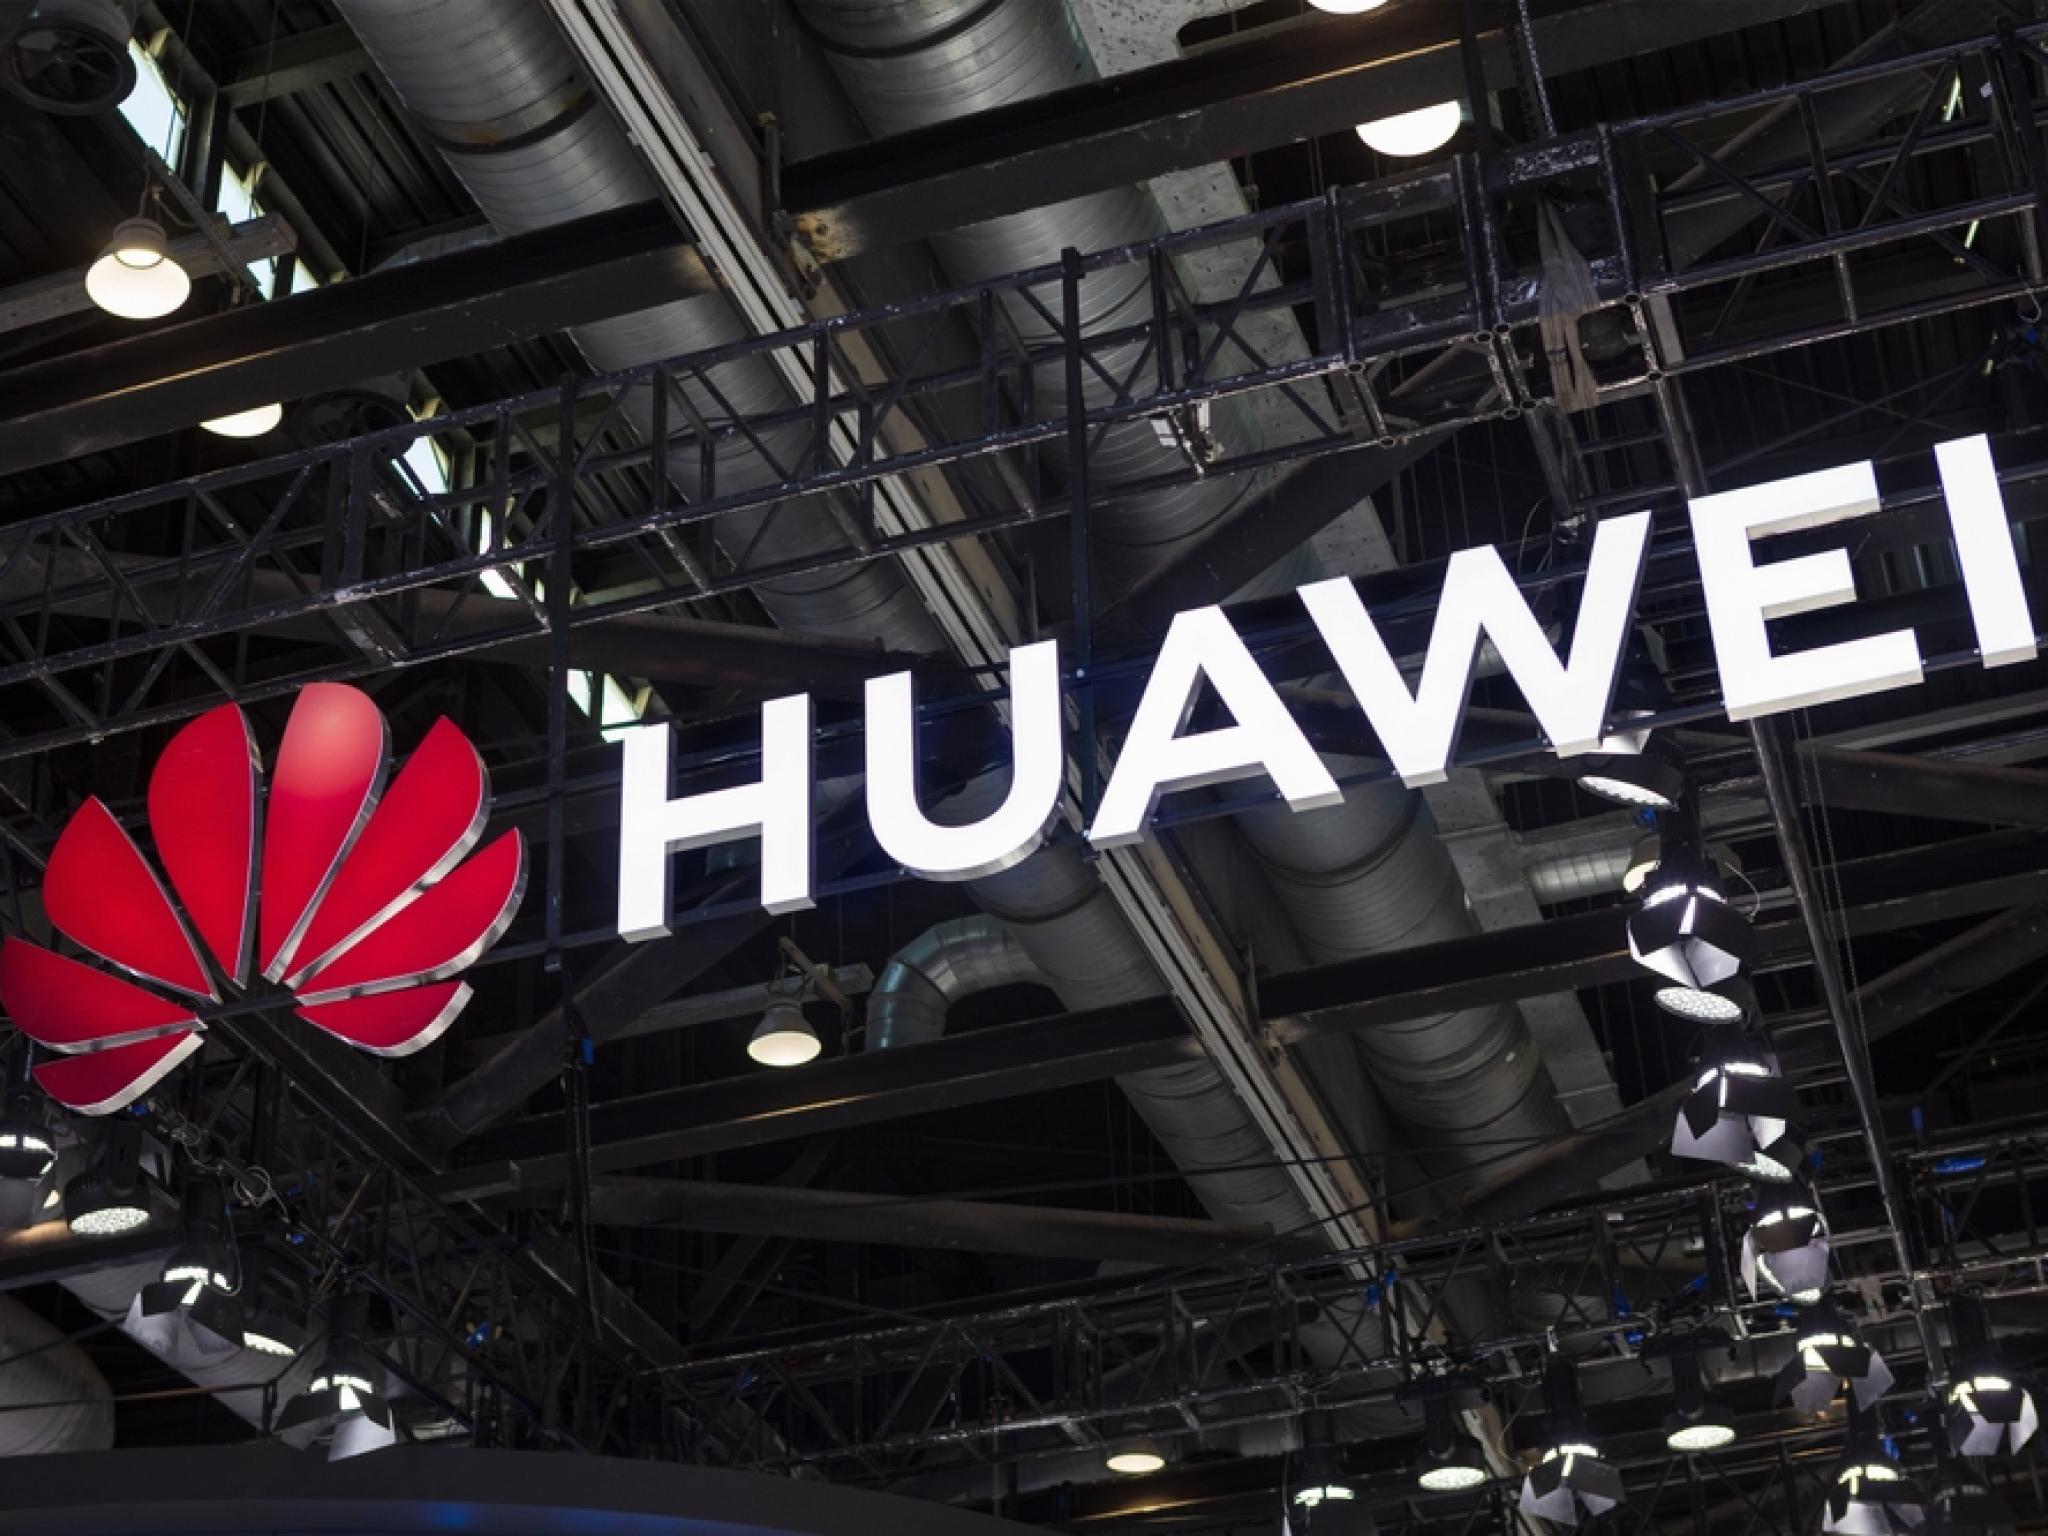  huawei-builds-largest-research-center-in-shanghai-report 